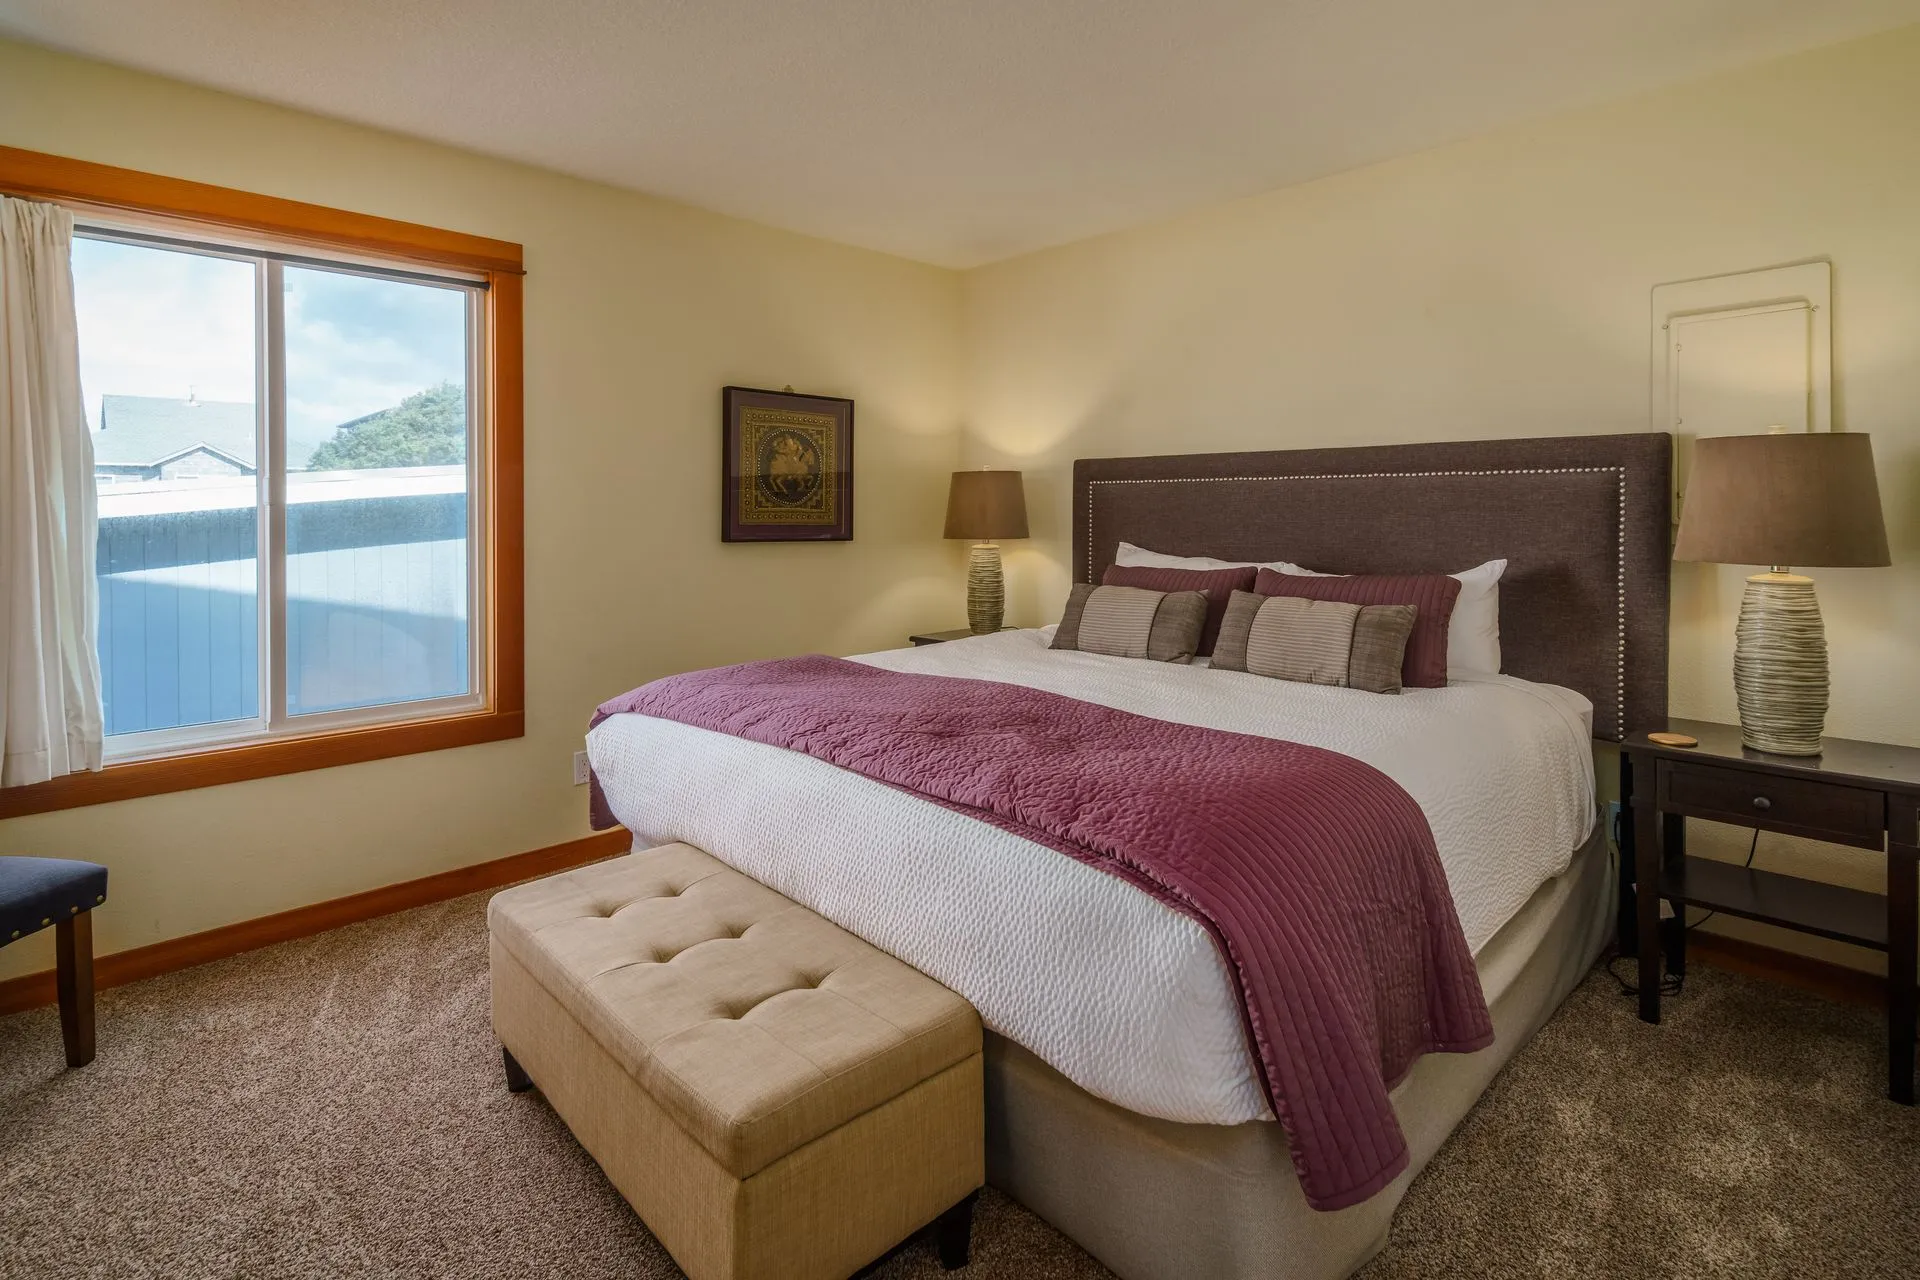 Vacation Rental in Cannon Beach, Pacific House bedroom